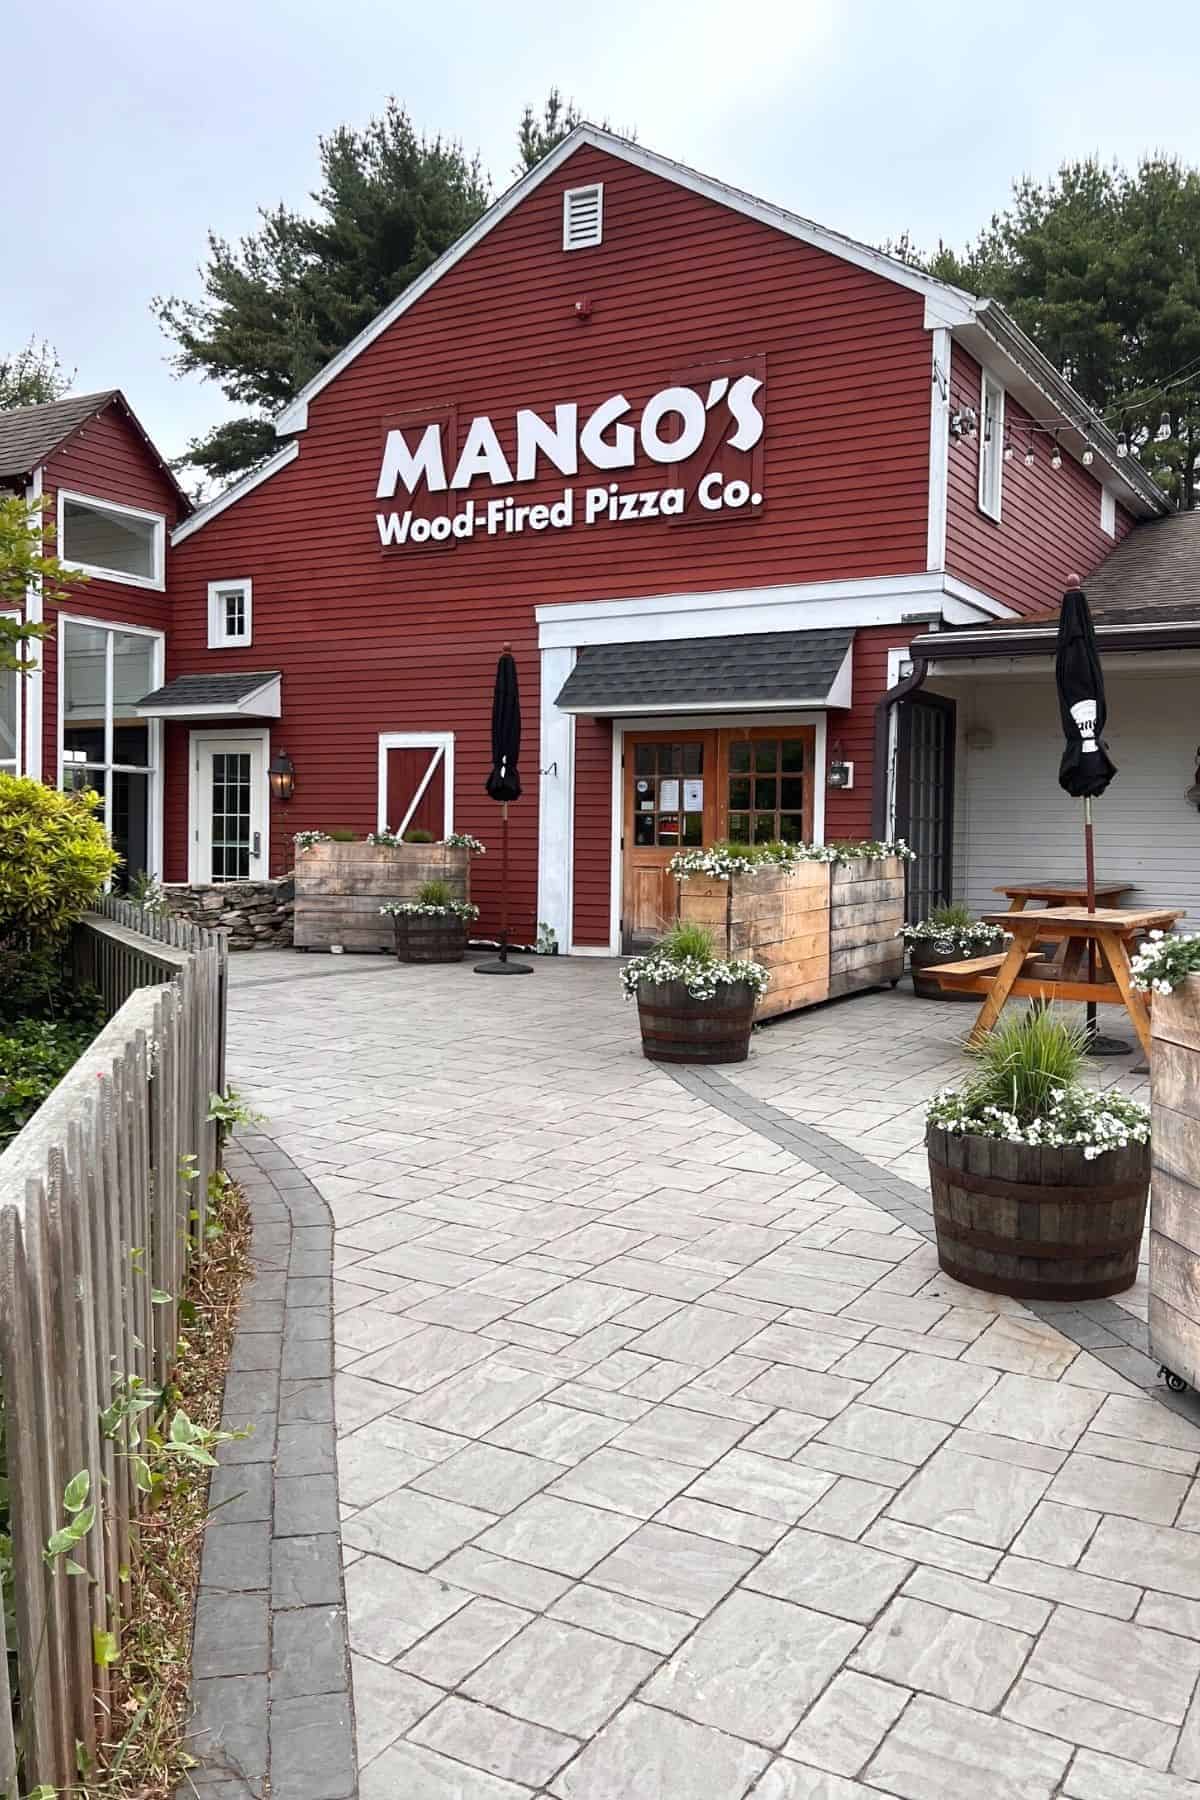 mangos storefront, one of the old mystic village restaurants specializing in pizza.